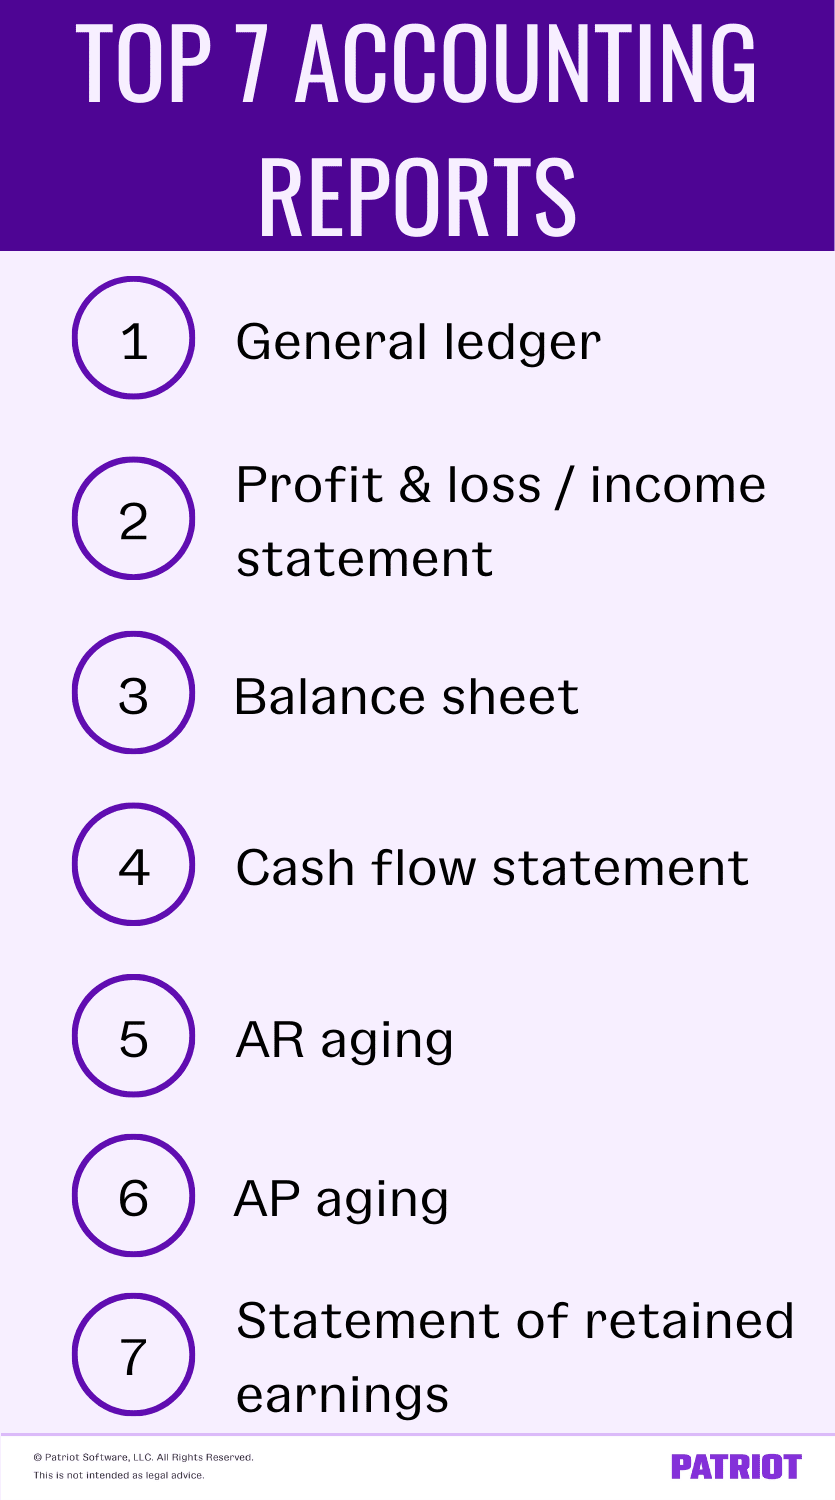 Top 7 accounting reports include the general ledger, profit and loss / income statement, balance sheet, cash flow statement, AR aging, AP aging, and the statement of retained earnings.